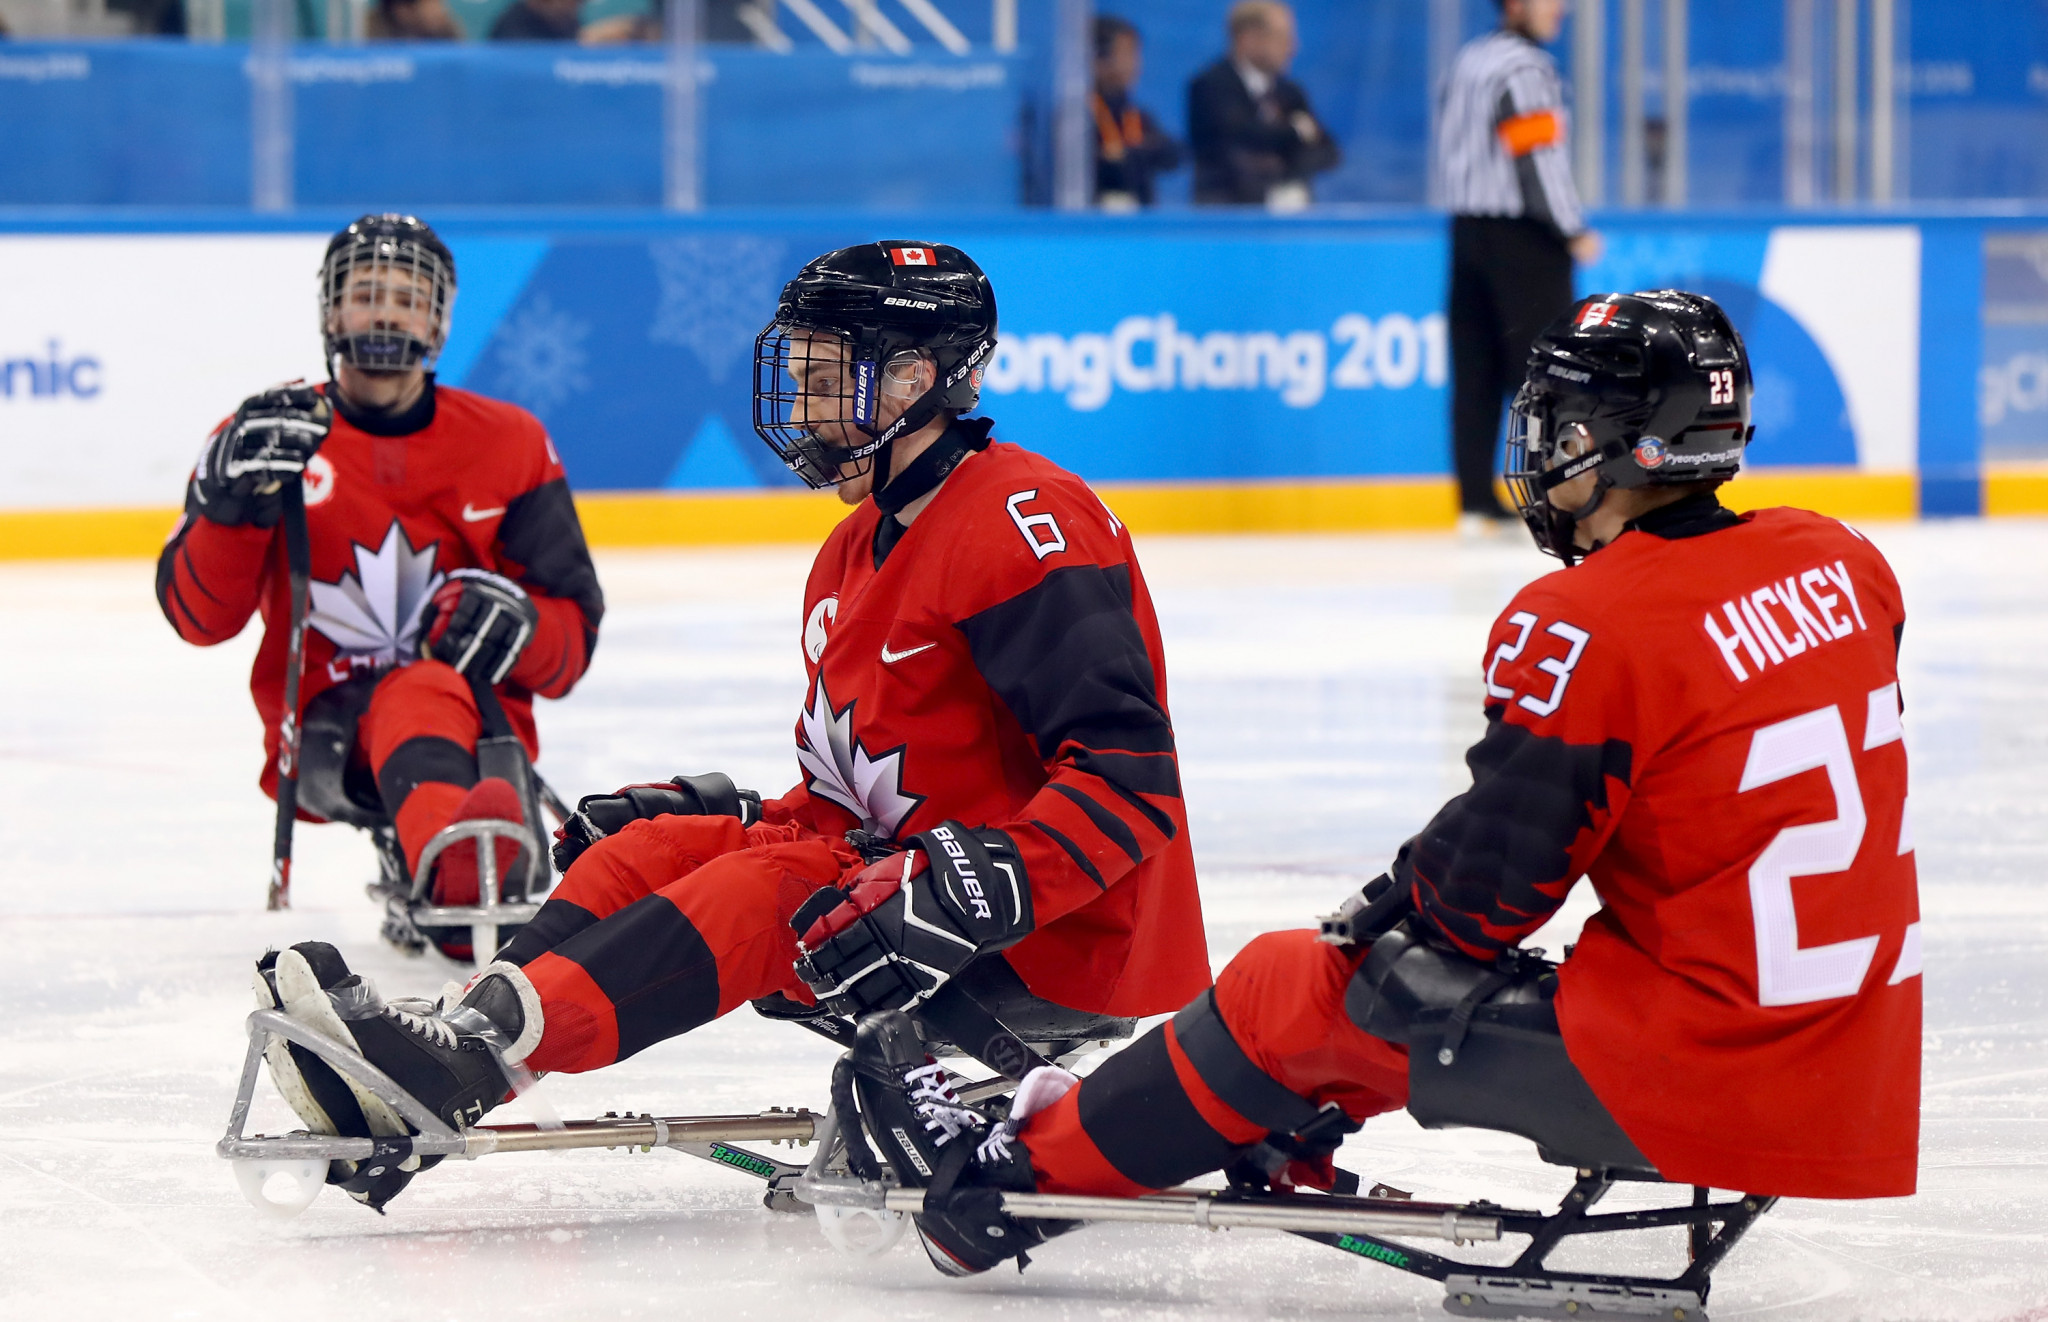 Canada won silver in ice hockey at the Pyeongchang 2018 Winter Paralympics ©Getty Images